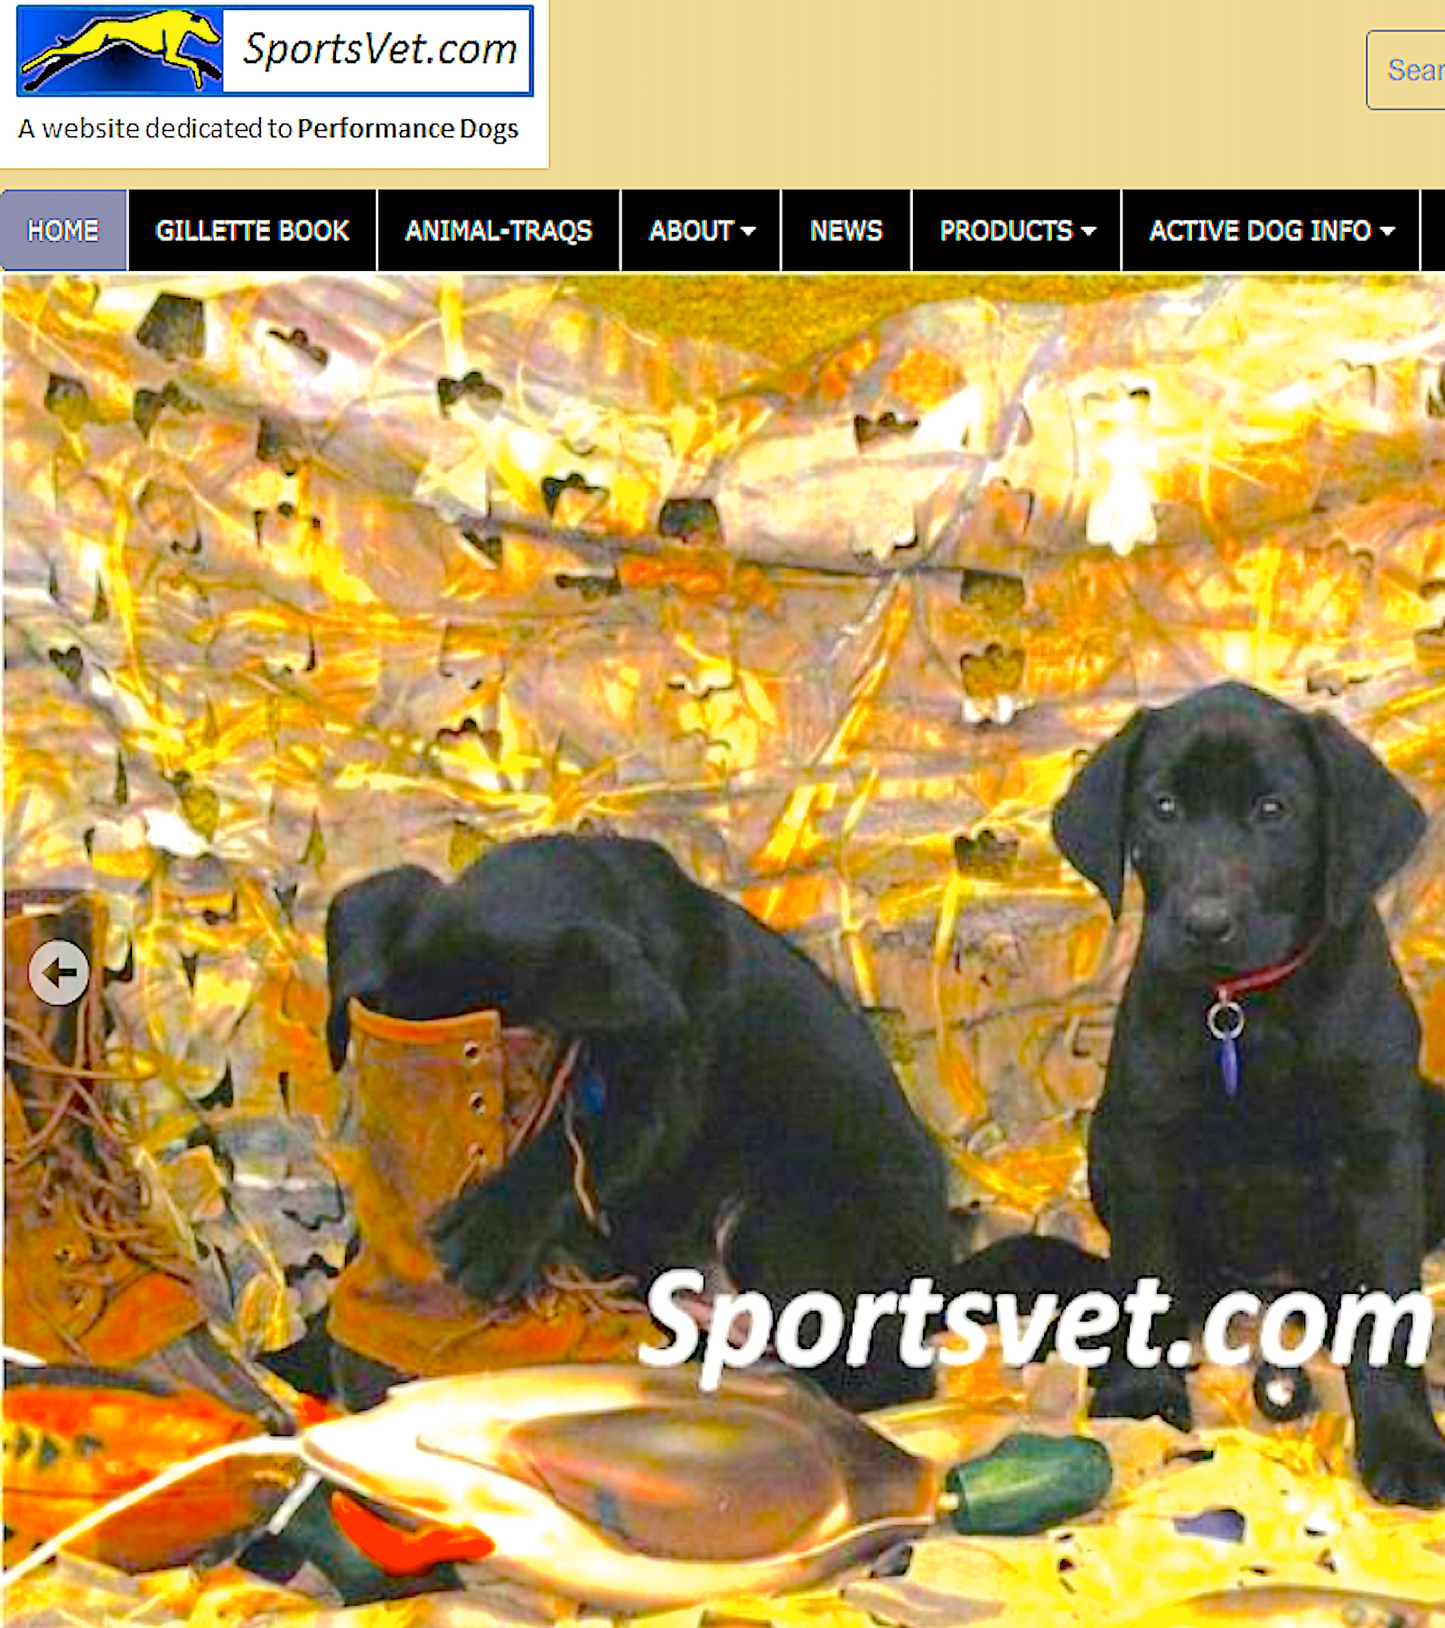 SPORTS VET: website dedicated to athletic and working dogs